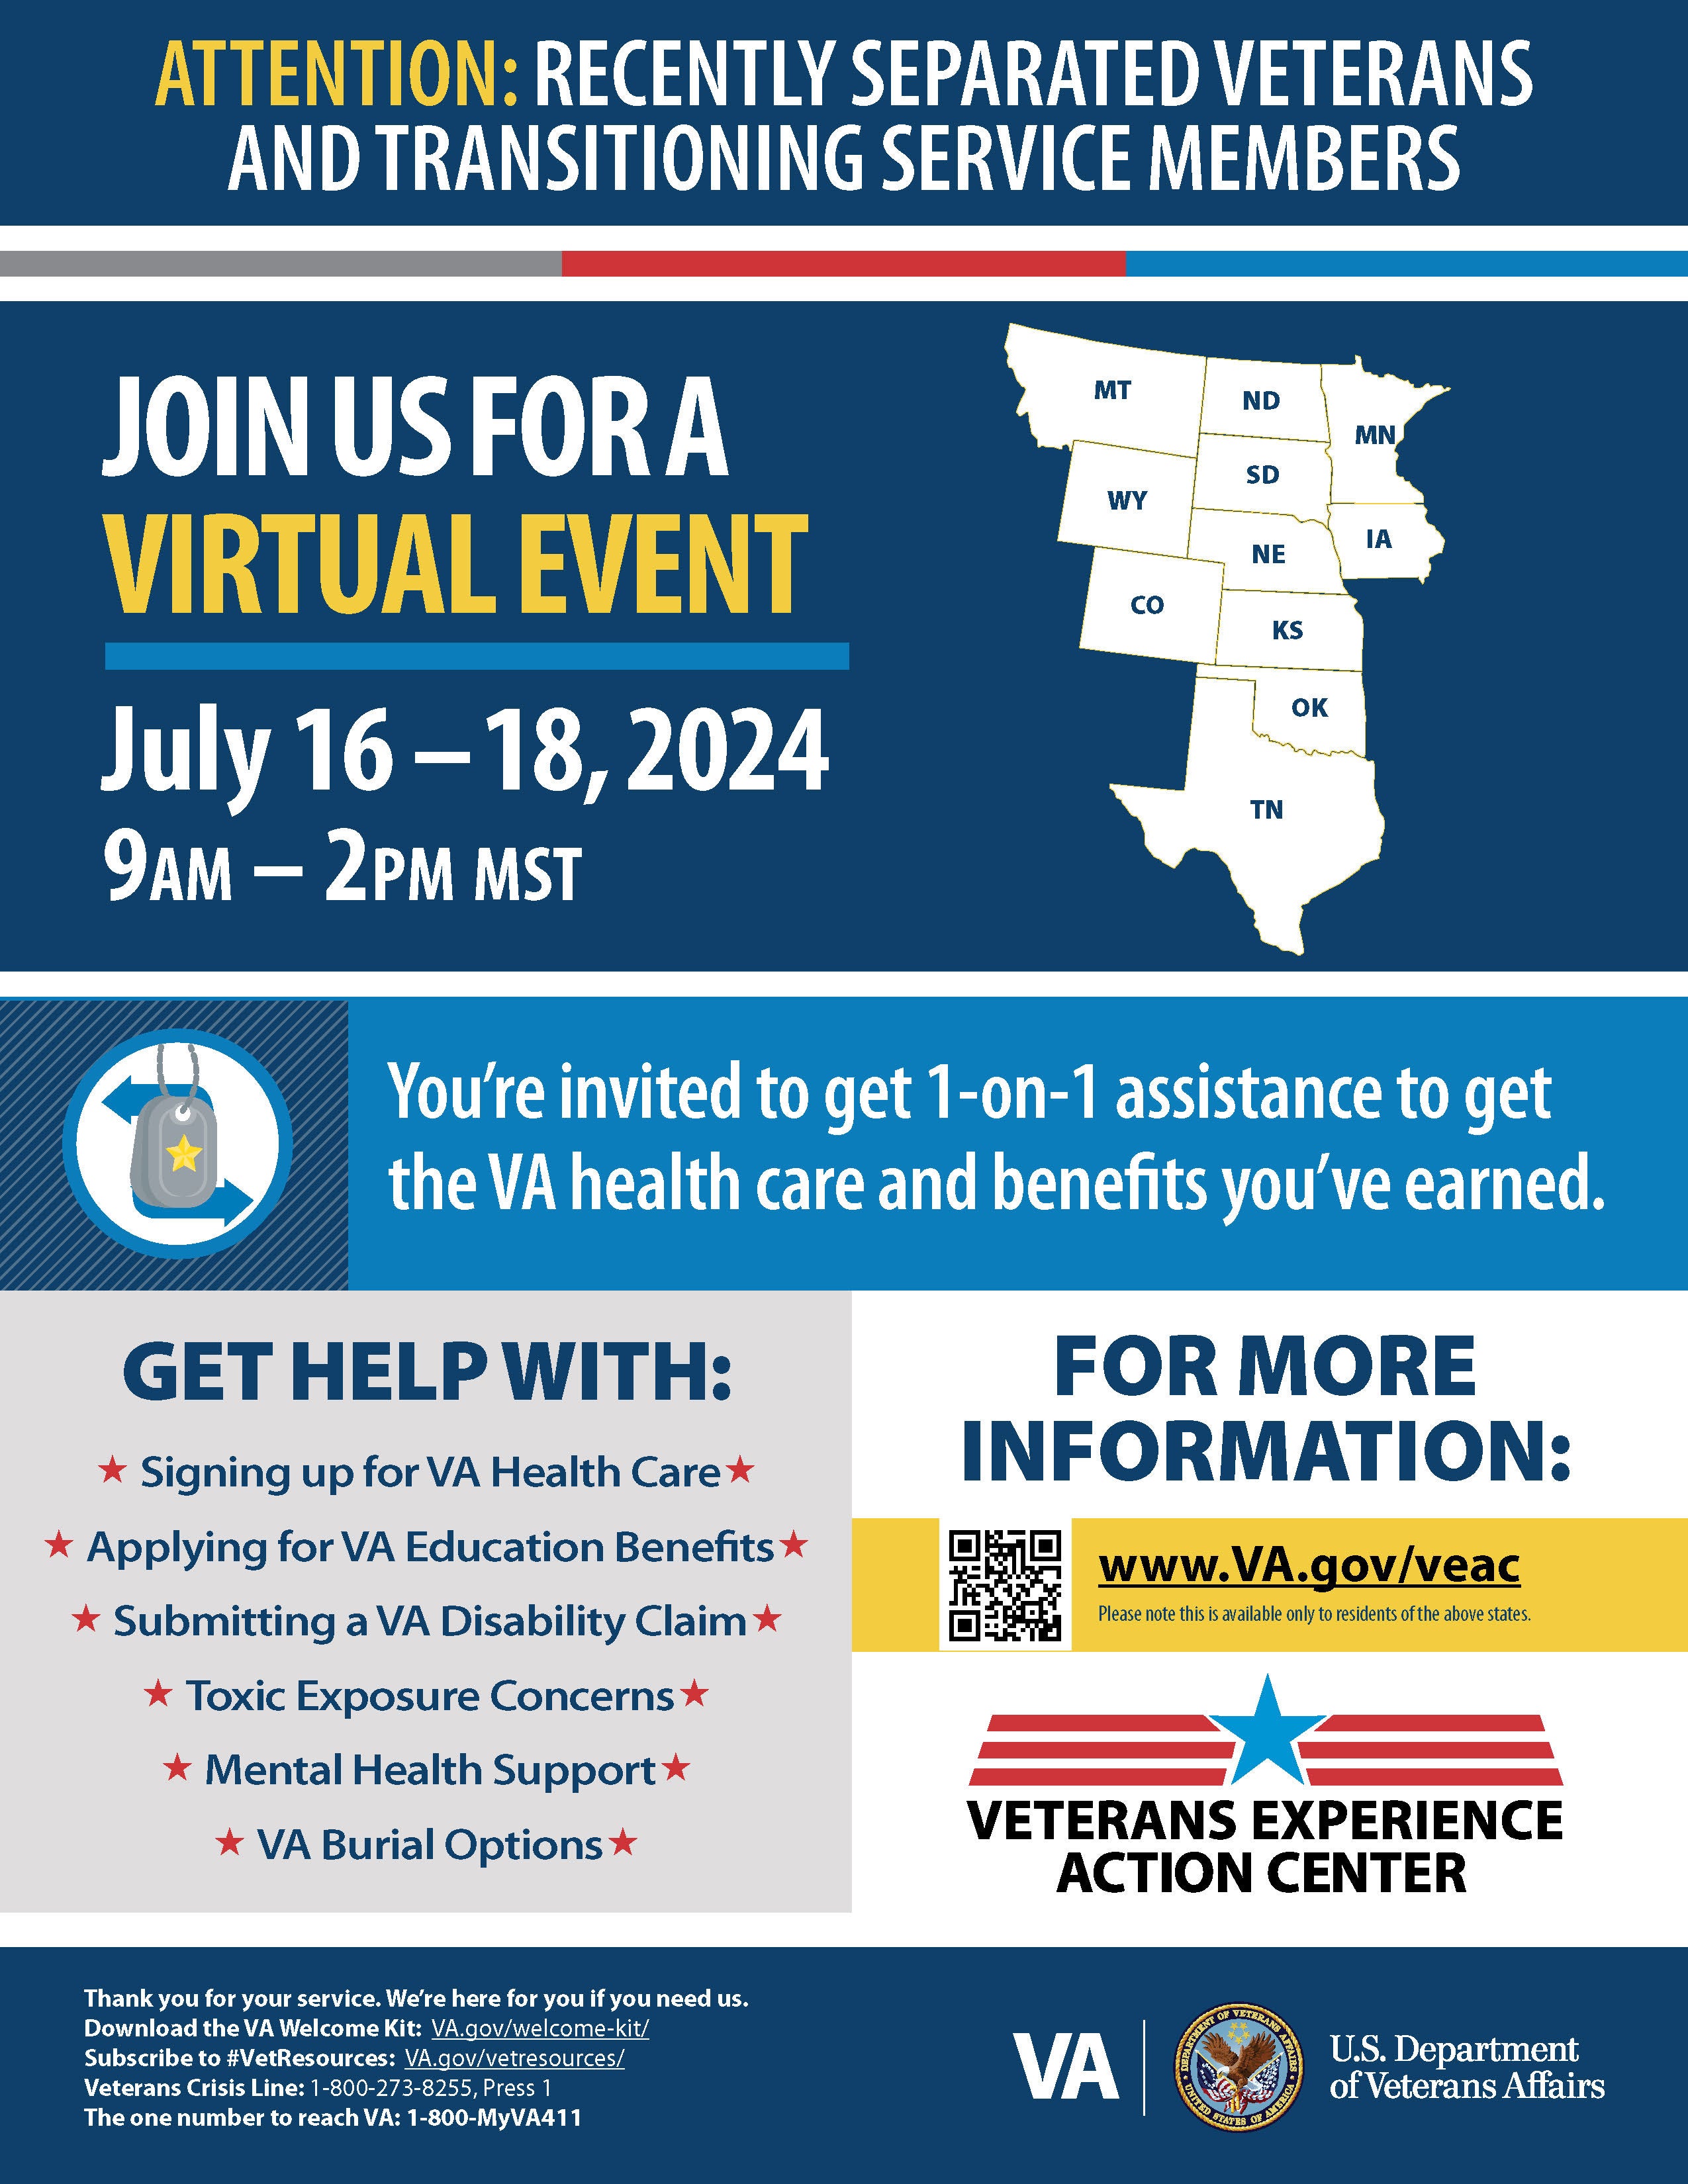 Continental Region Veteran Experience Action Center (VEAC)